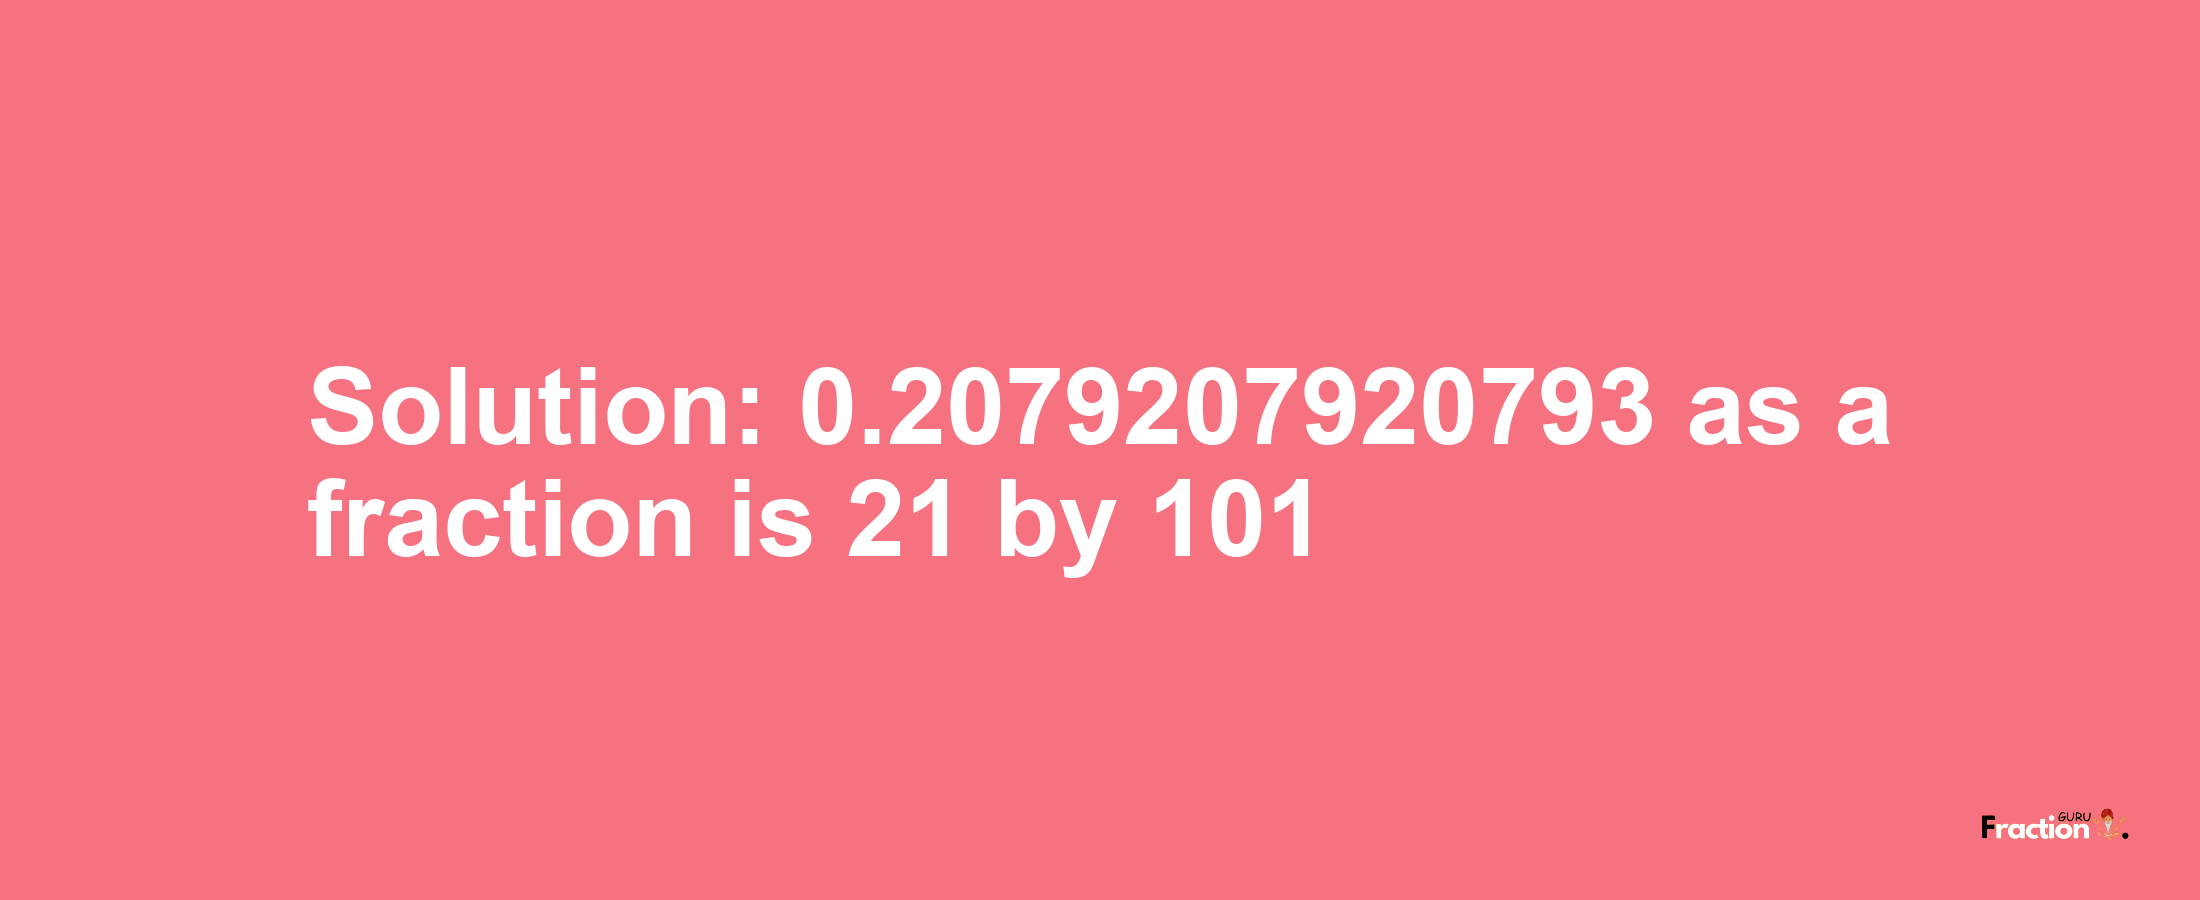 Solution:0.2079207920793 as a fraction is 21/101